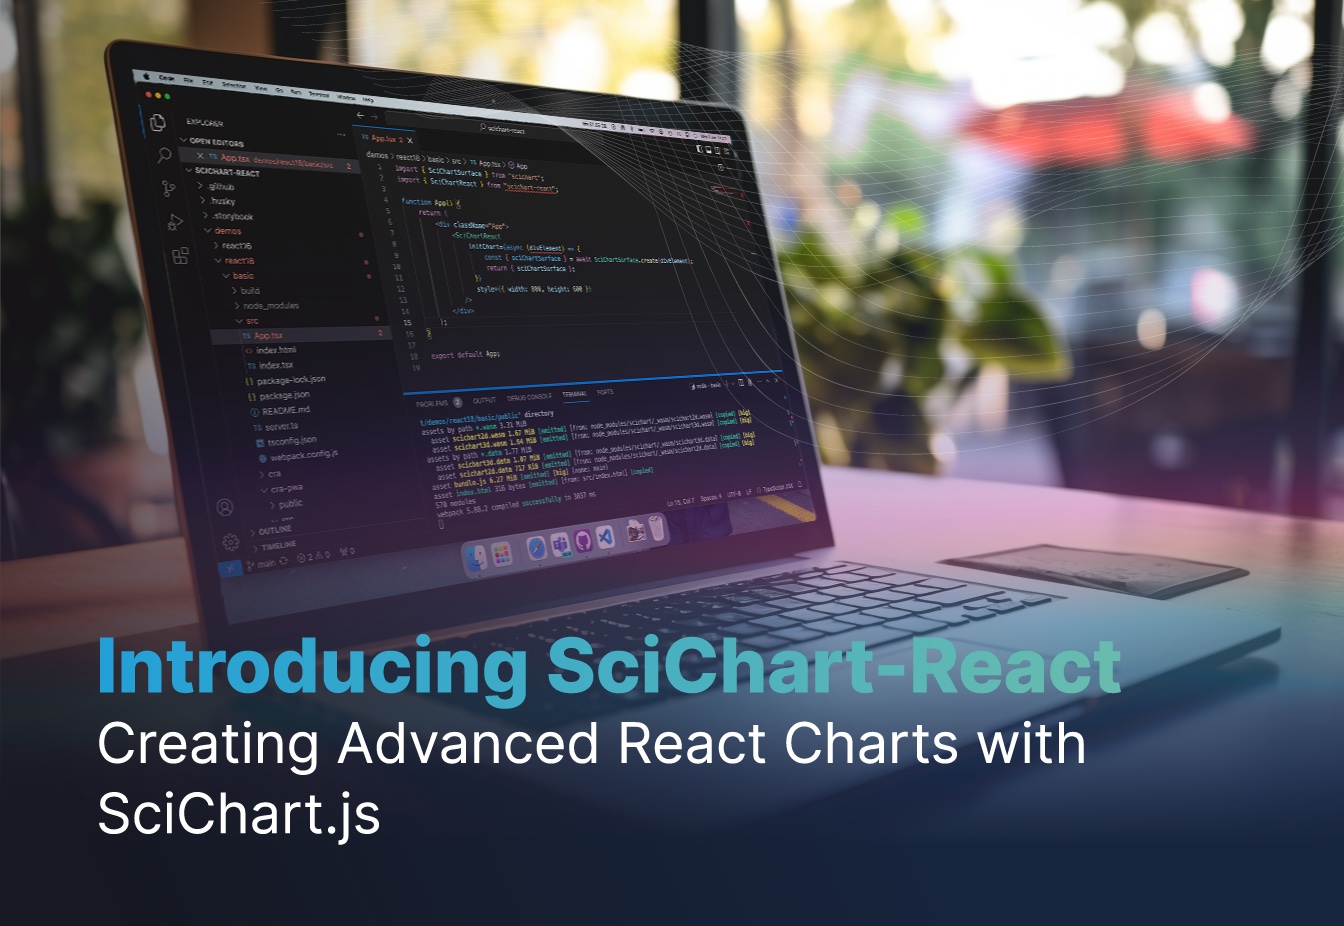 React Charts with SciChart.js: Introducing scichart-react